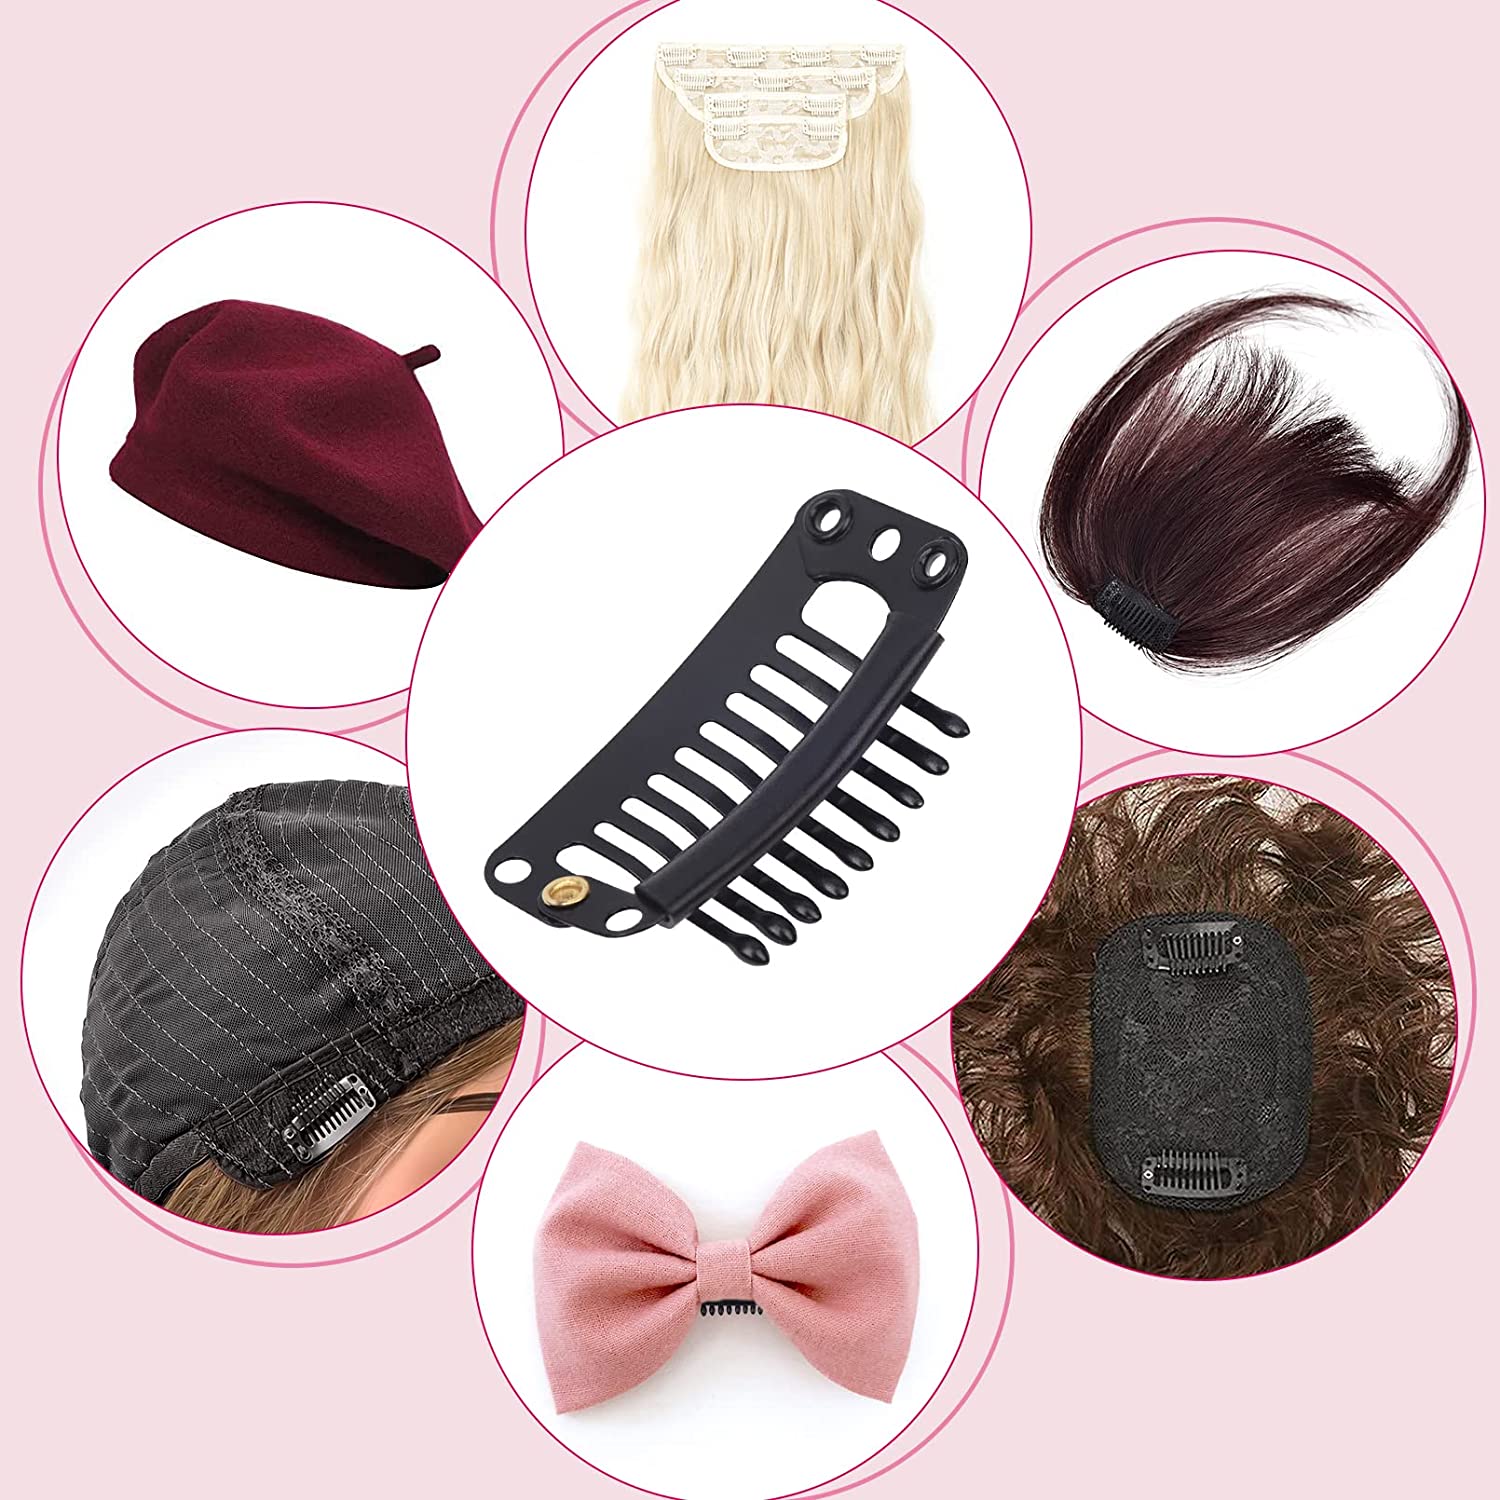 Metal Wig Clips Wig Hair Extension Clips Wig Snap Clips 9-Teeth Wig Clips  to Sew in Wig Clips to Secure Wig Hair Clips for Hairpiece Wig Accessories